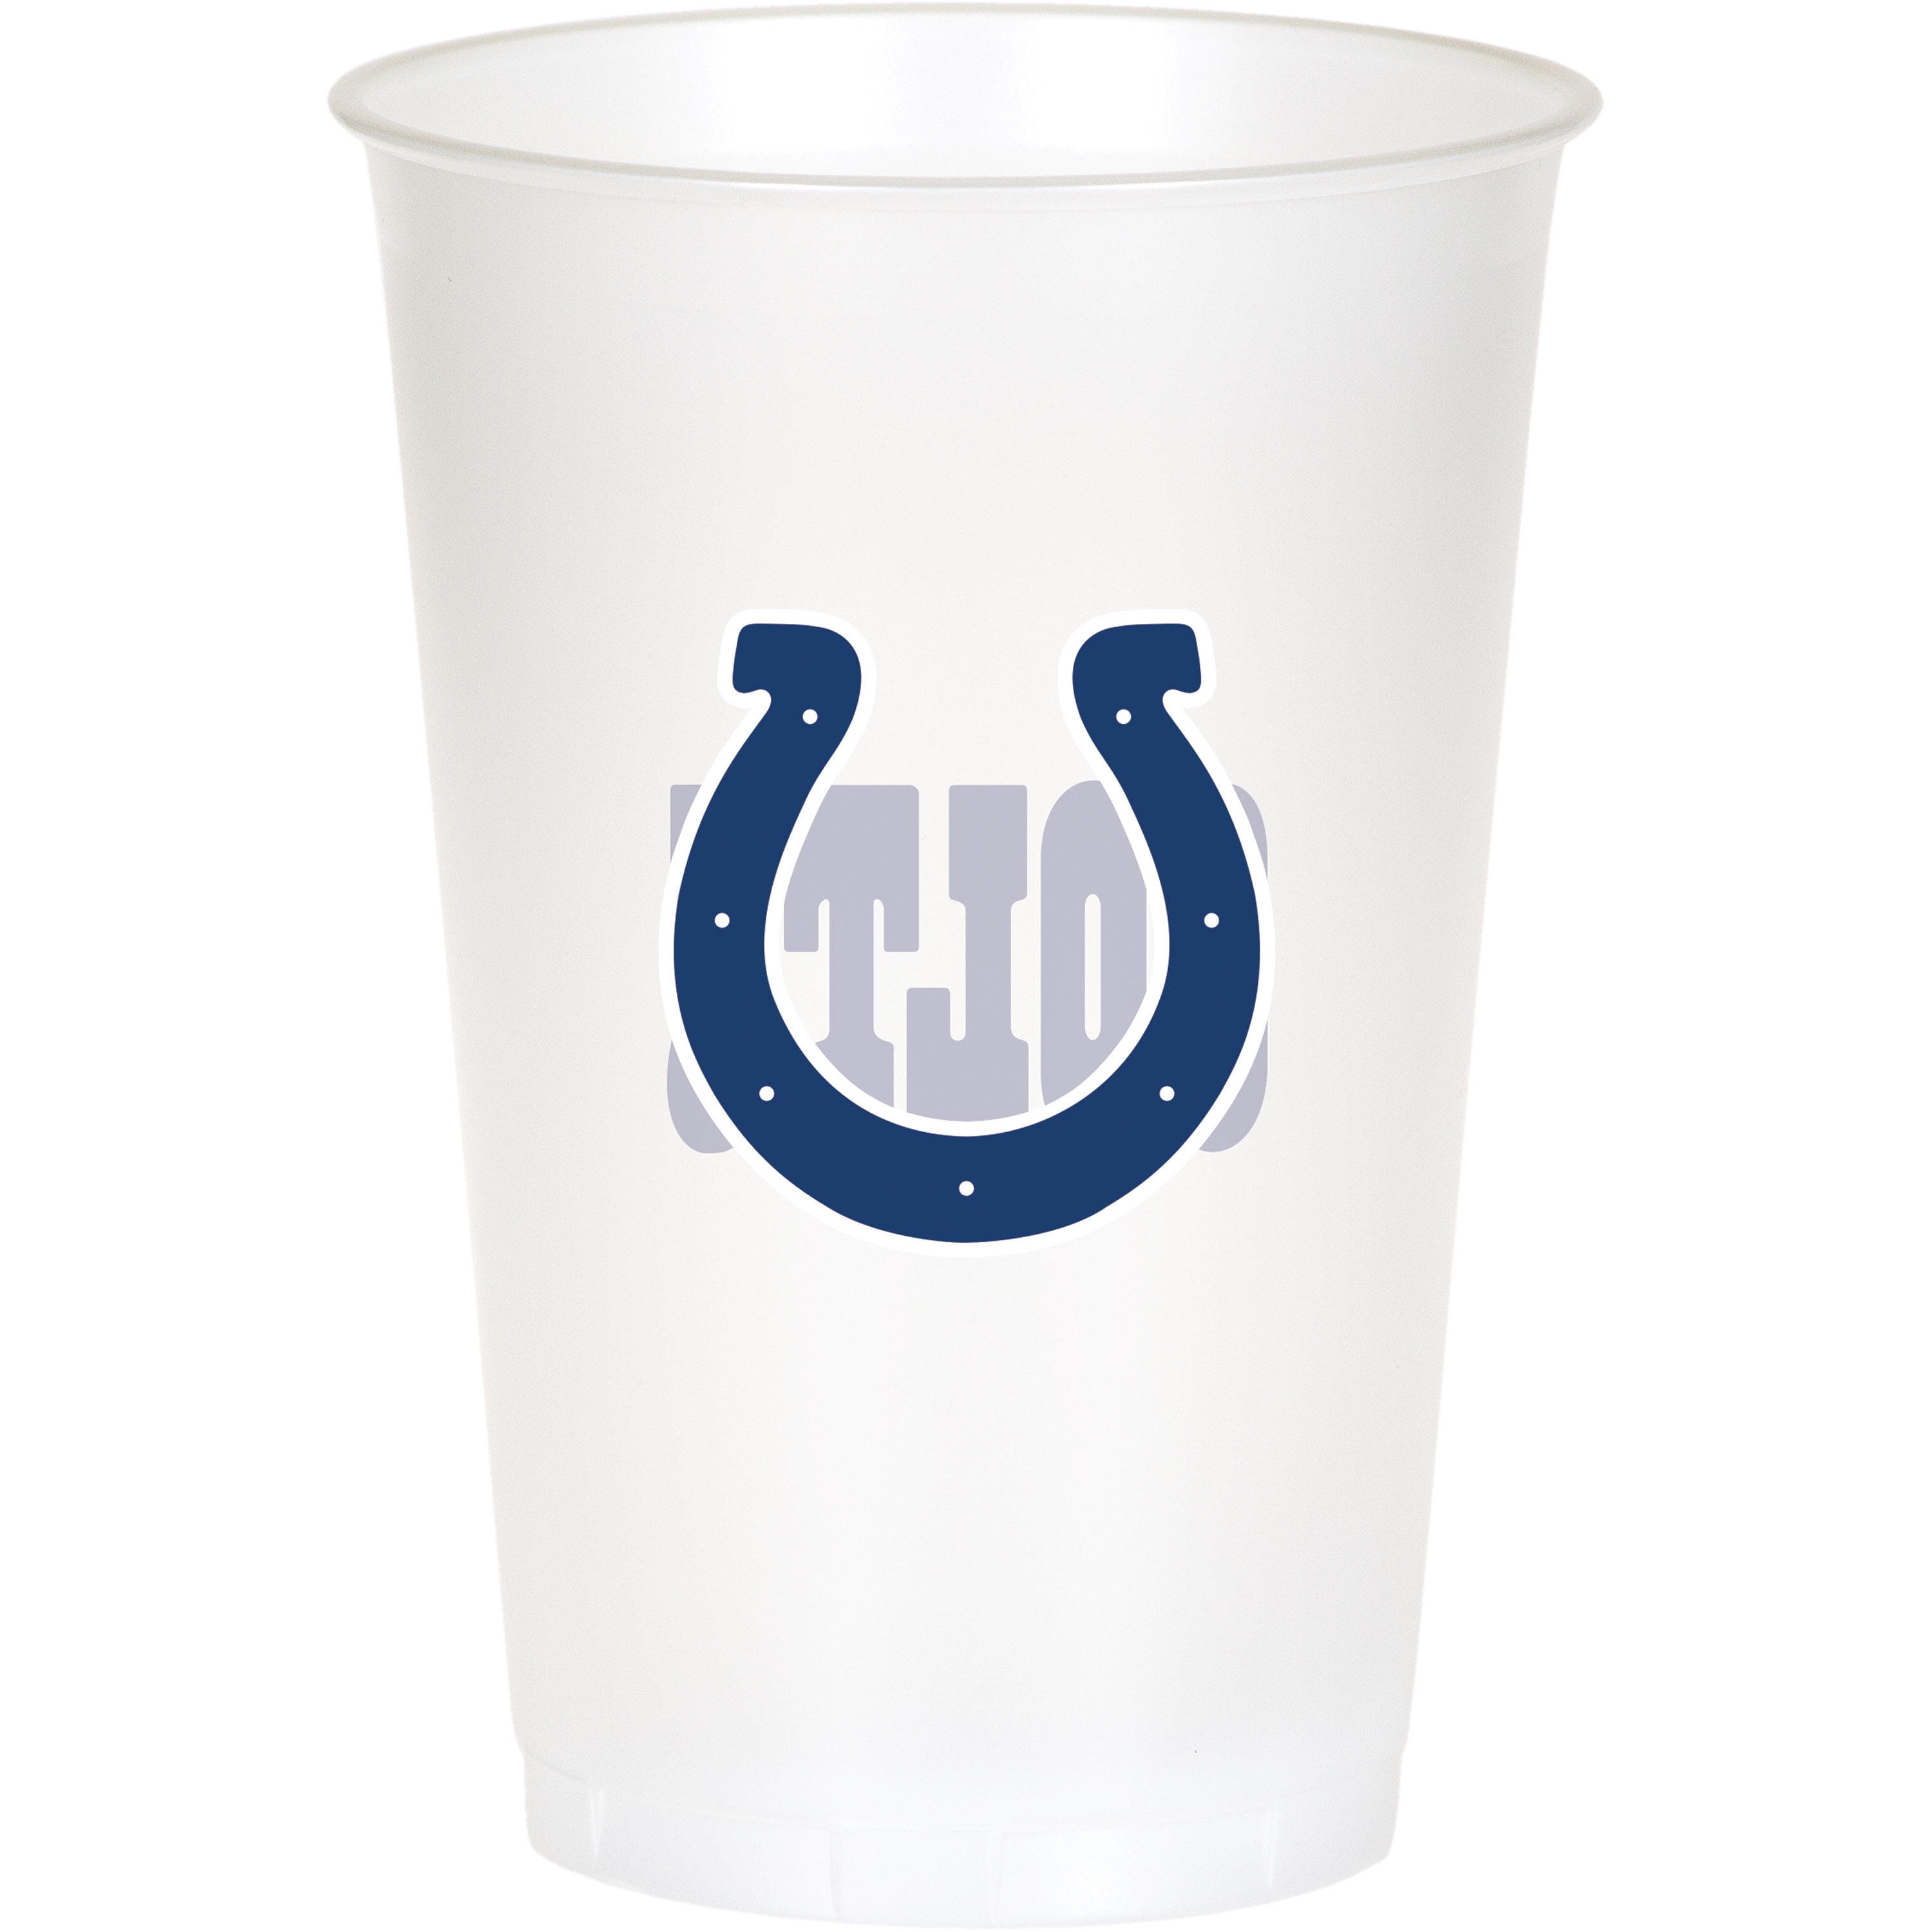 Indianapolis Colts Plastic Cups, 24 Count for 24 Guests